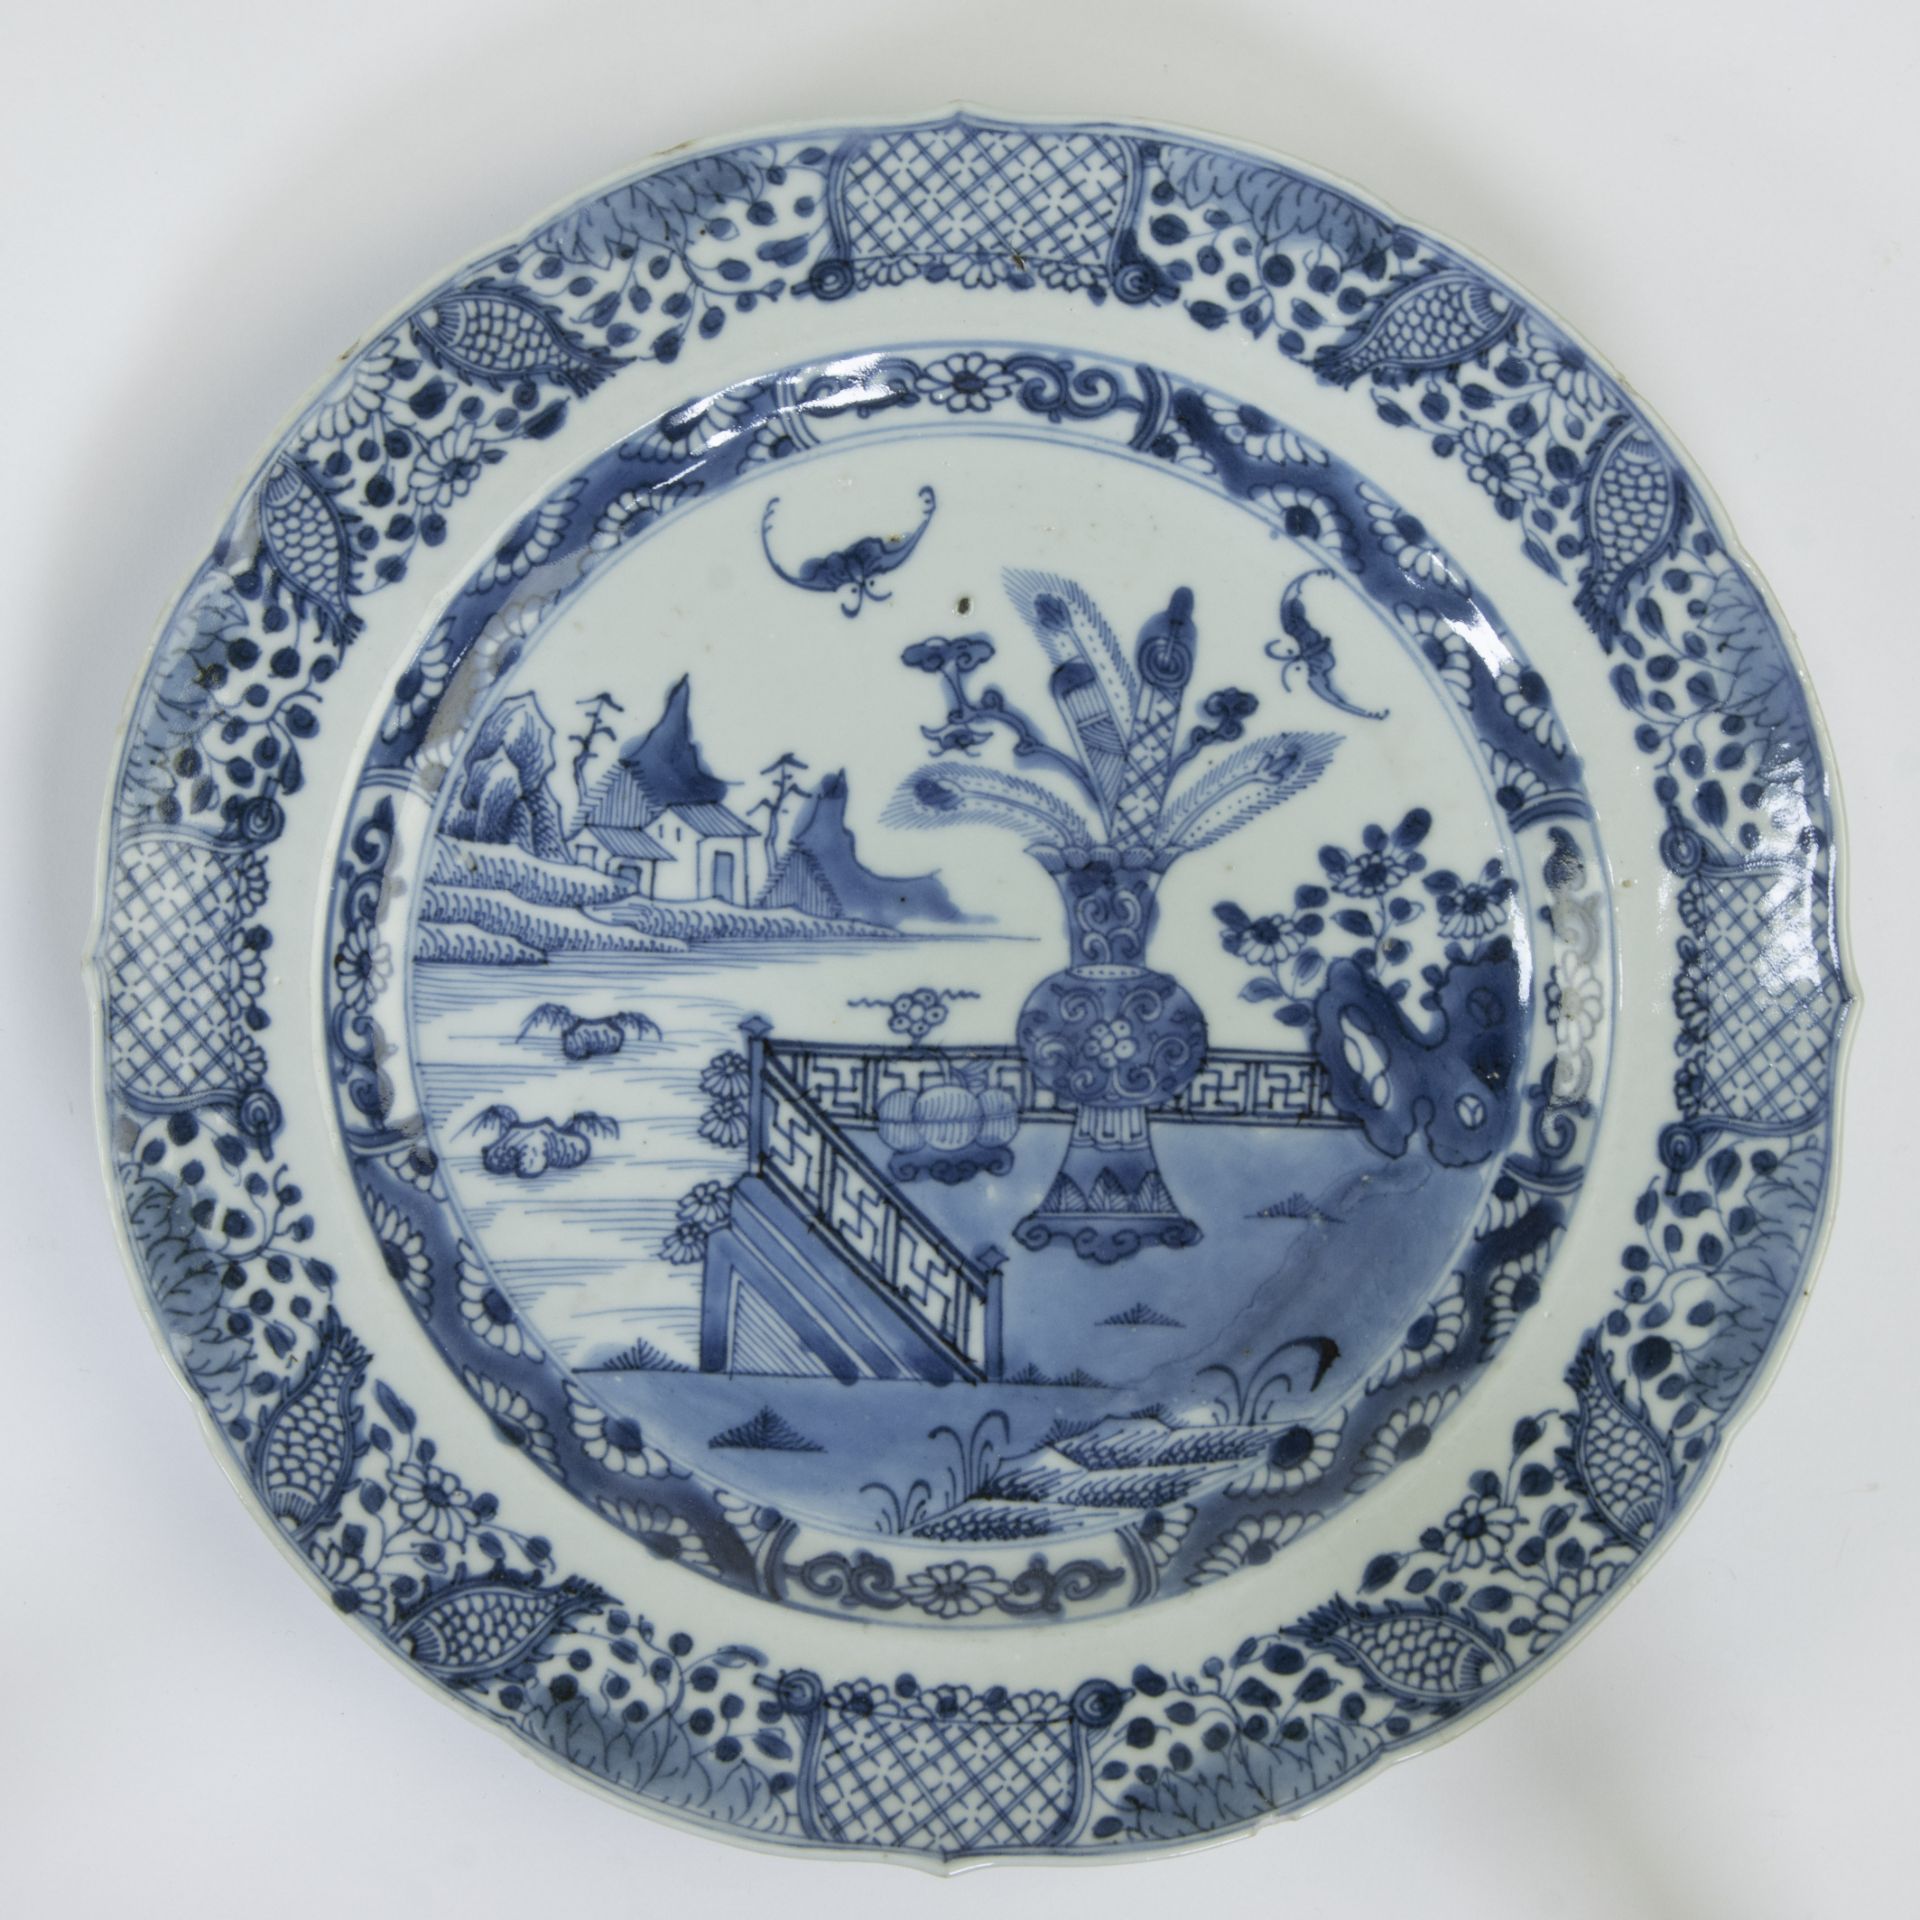 2 Chinese Imari plates and 4 blue and white plates, 18th century - Image 10 of 13